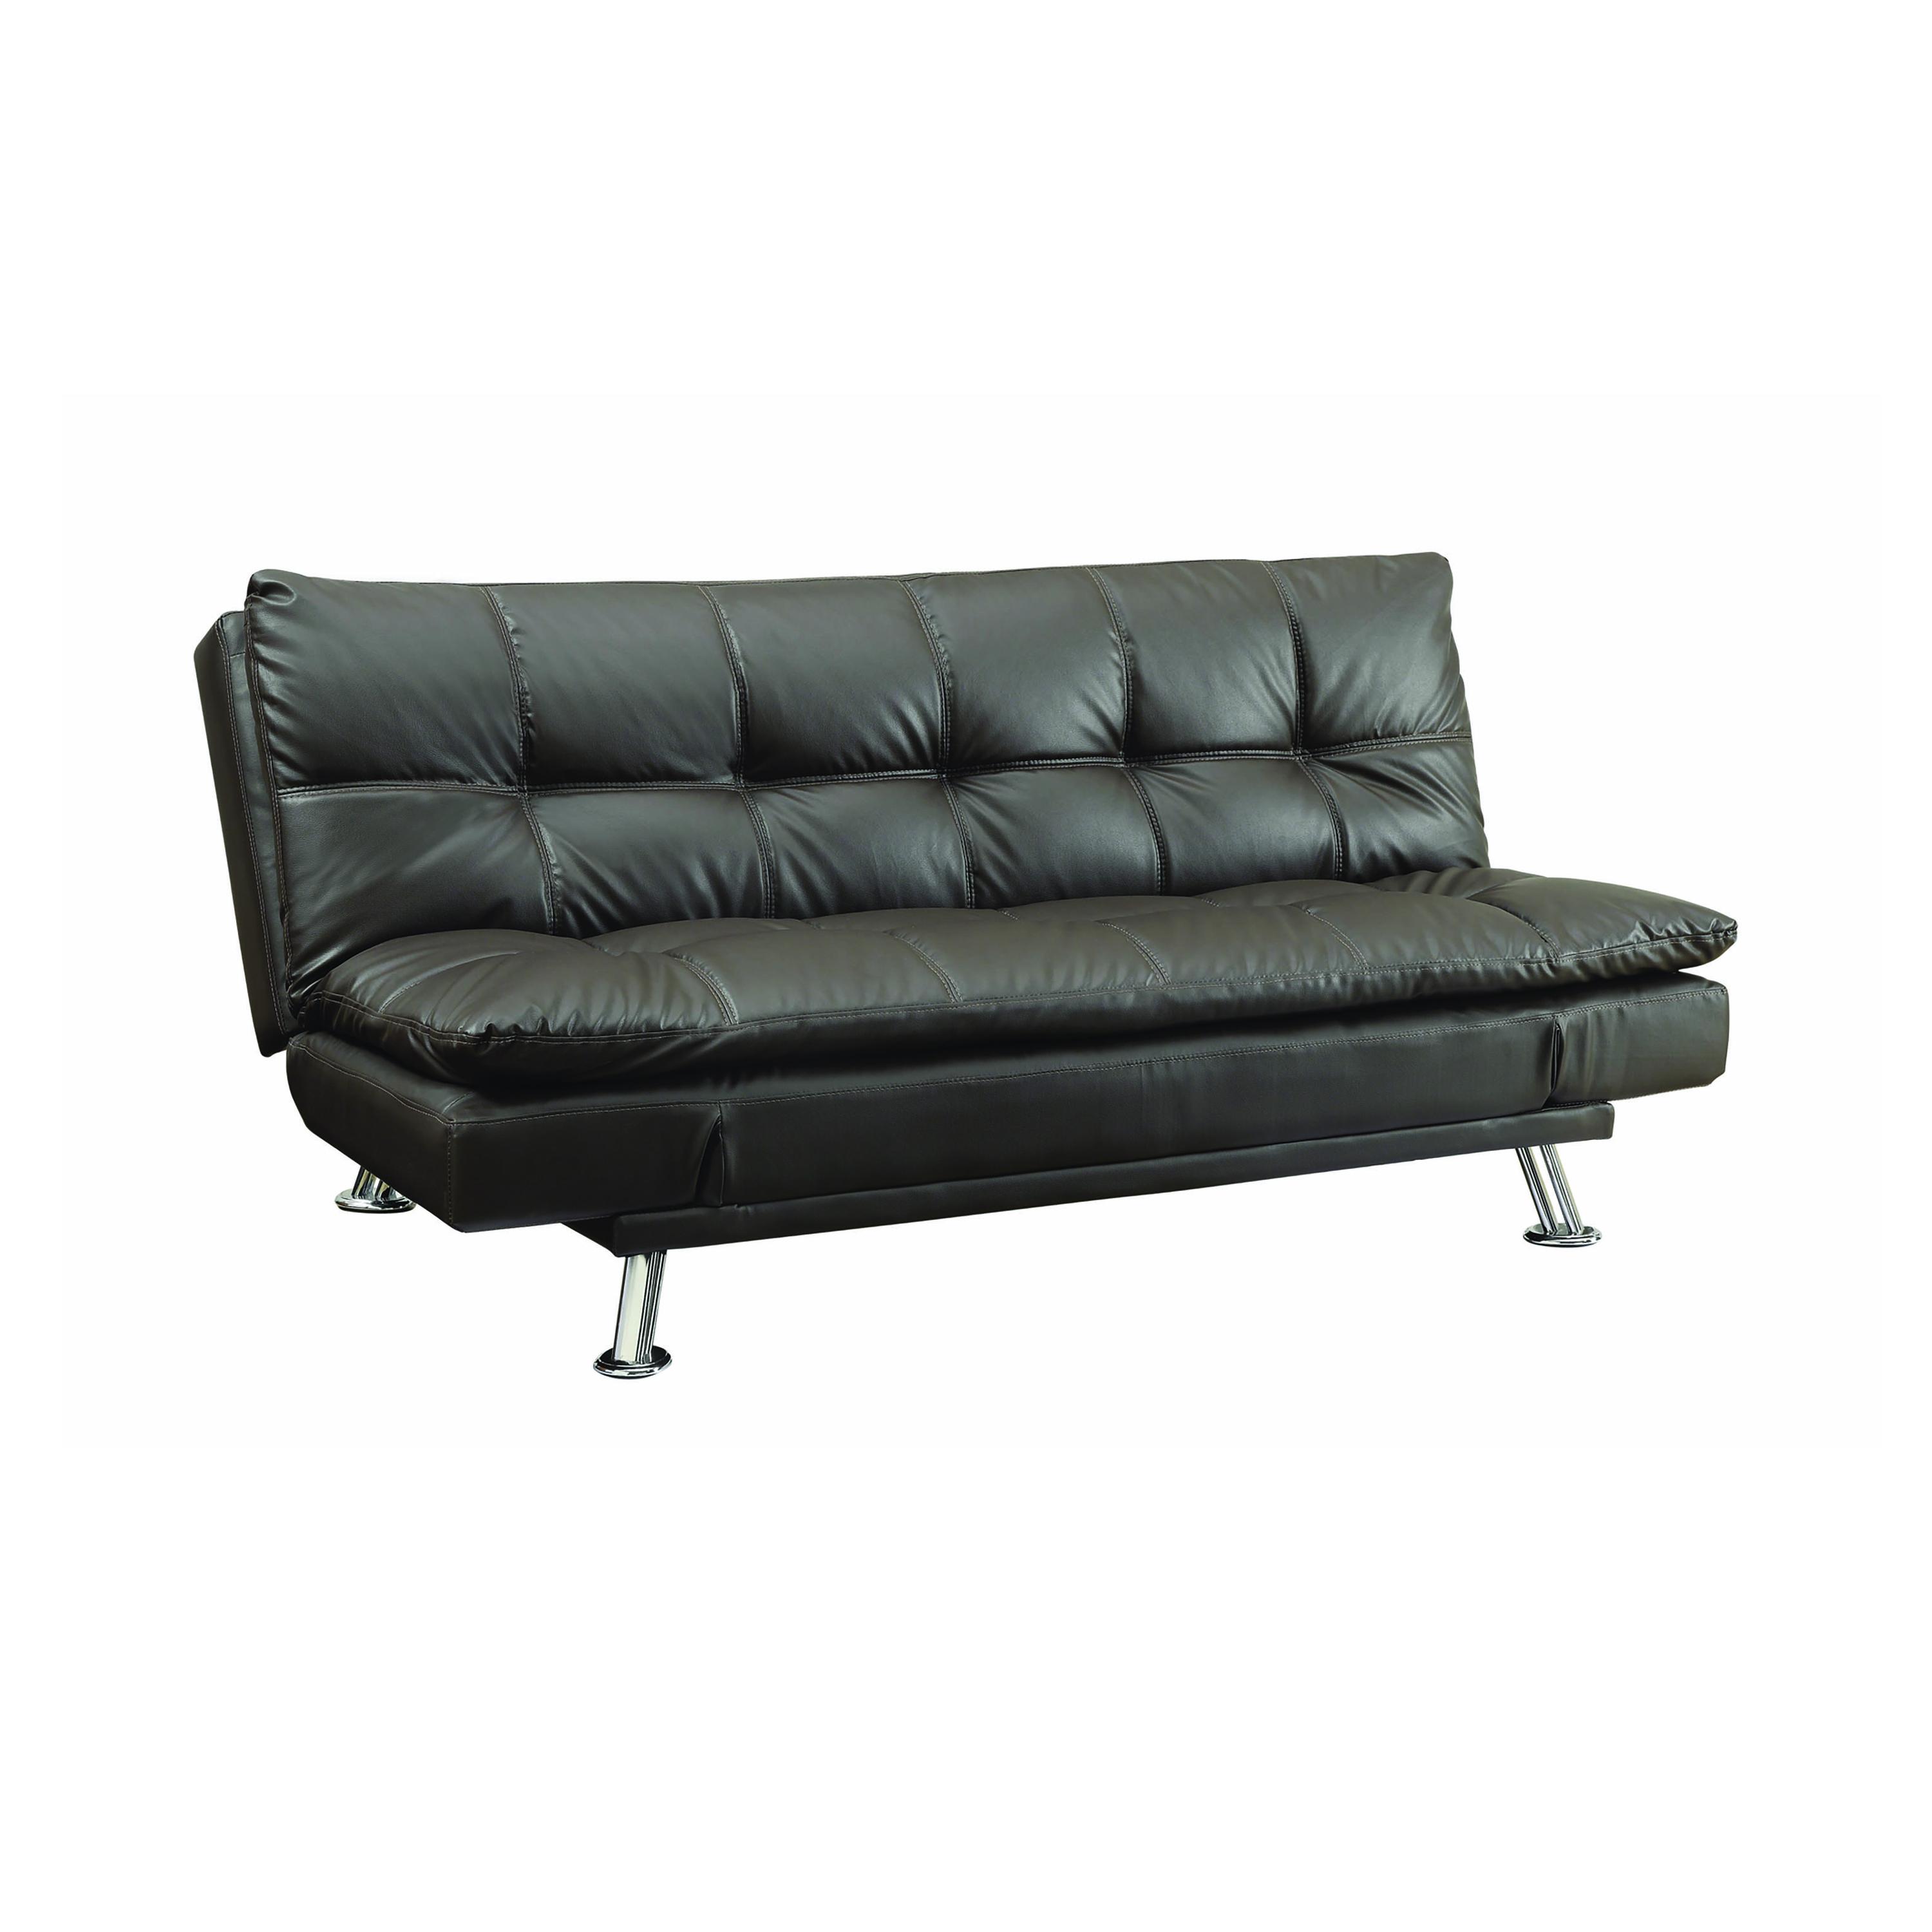 Modern Sofa bed 300321 Dilleston 300321 in Brown Leatherette